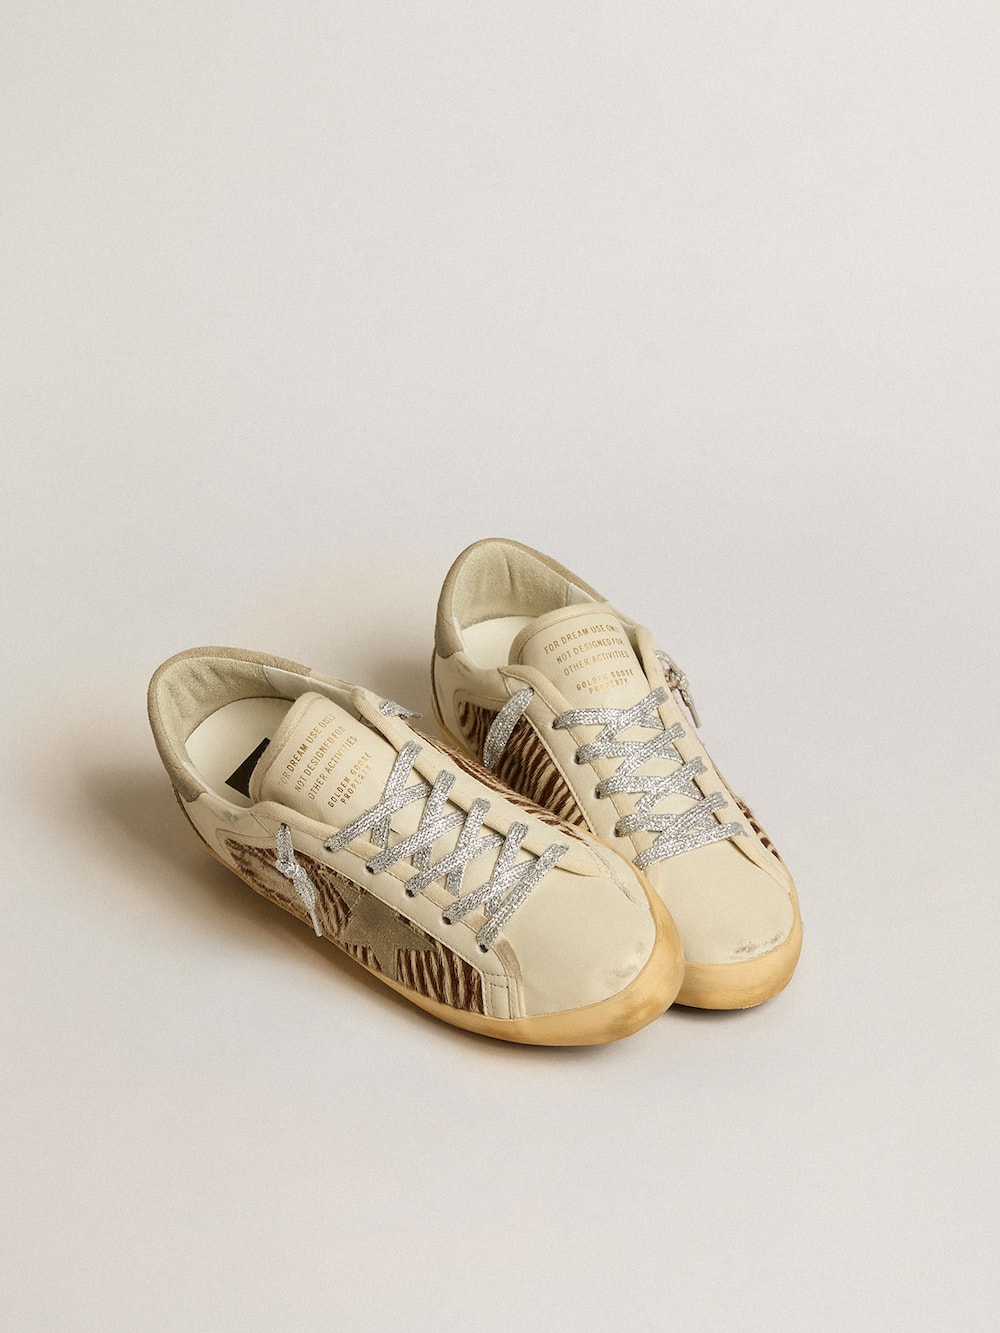 Golden Goose - Women's Super-Star in leather and pony skin with dove-gray suede star and heel tab in 